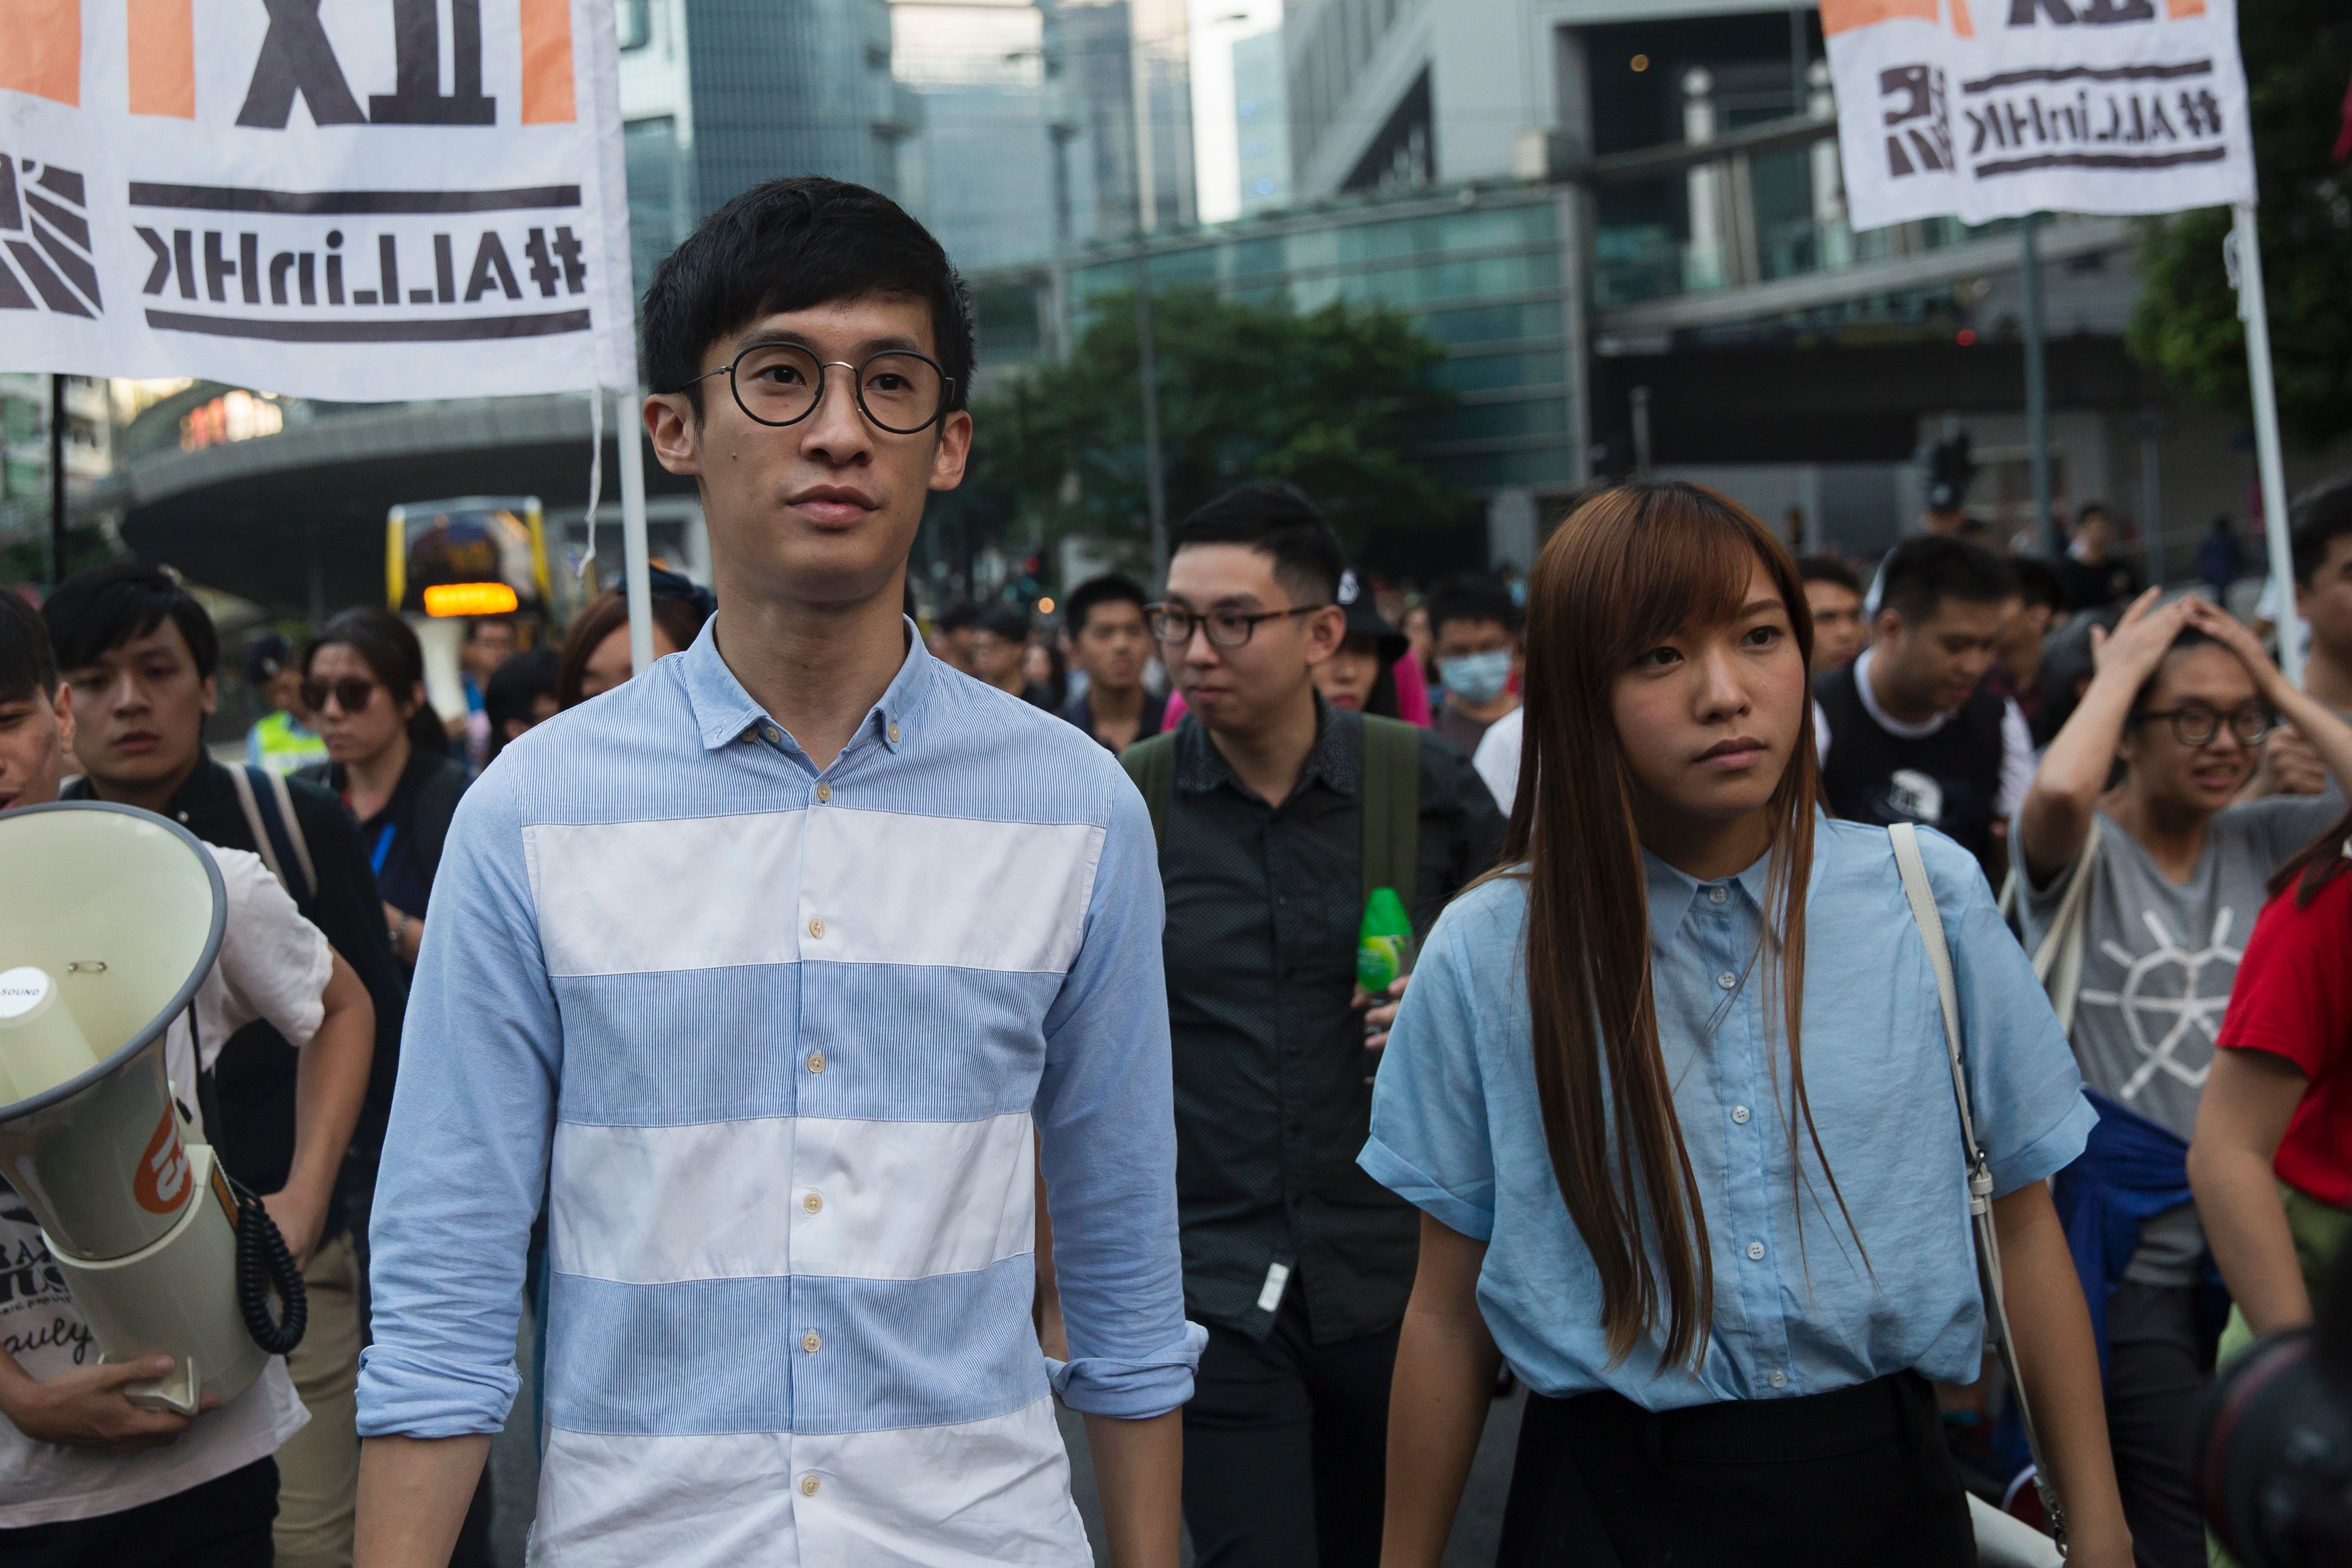 Sixtus "Baggio" Leung, left, and Yau Wai-ching, both elected lawmakers of Youngspiration party, march during a protest in Hong Kong on Nov. 6, 2016 (Isaac Lawrence—AFP/Getty Images)